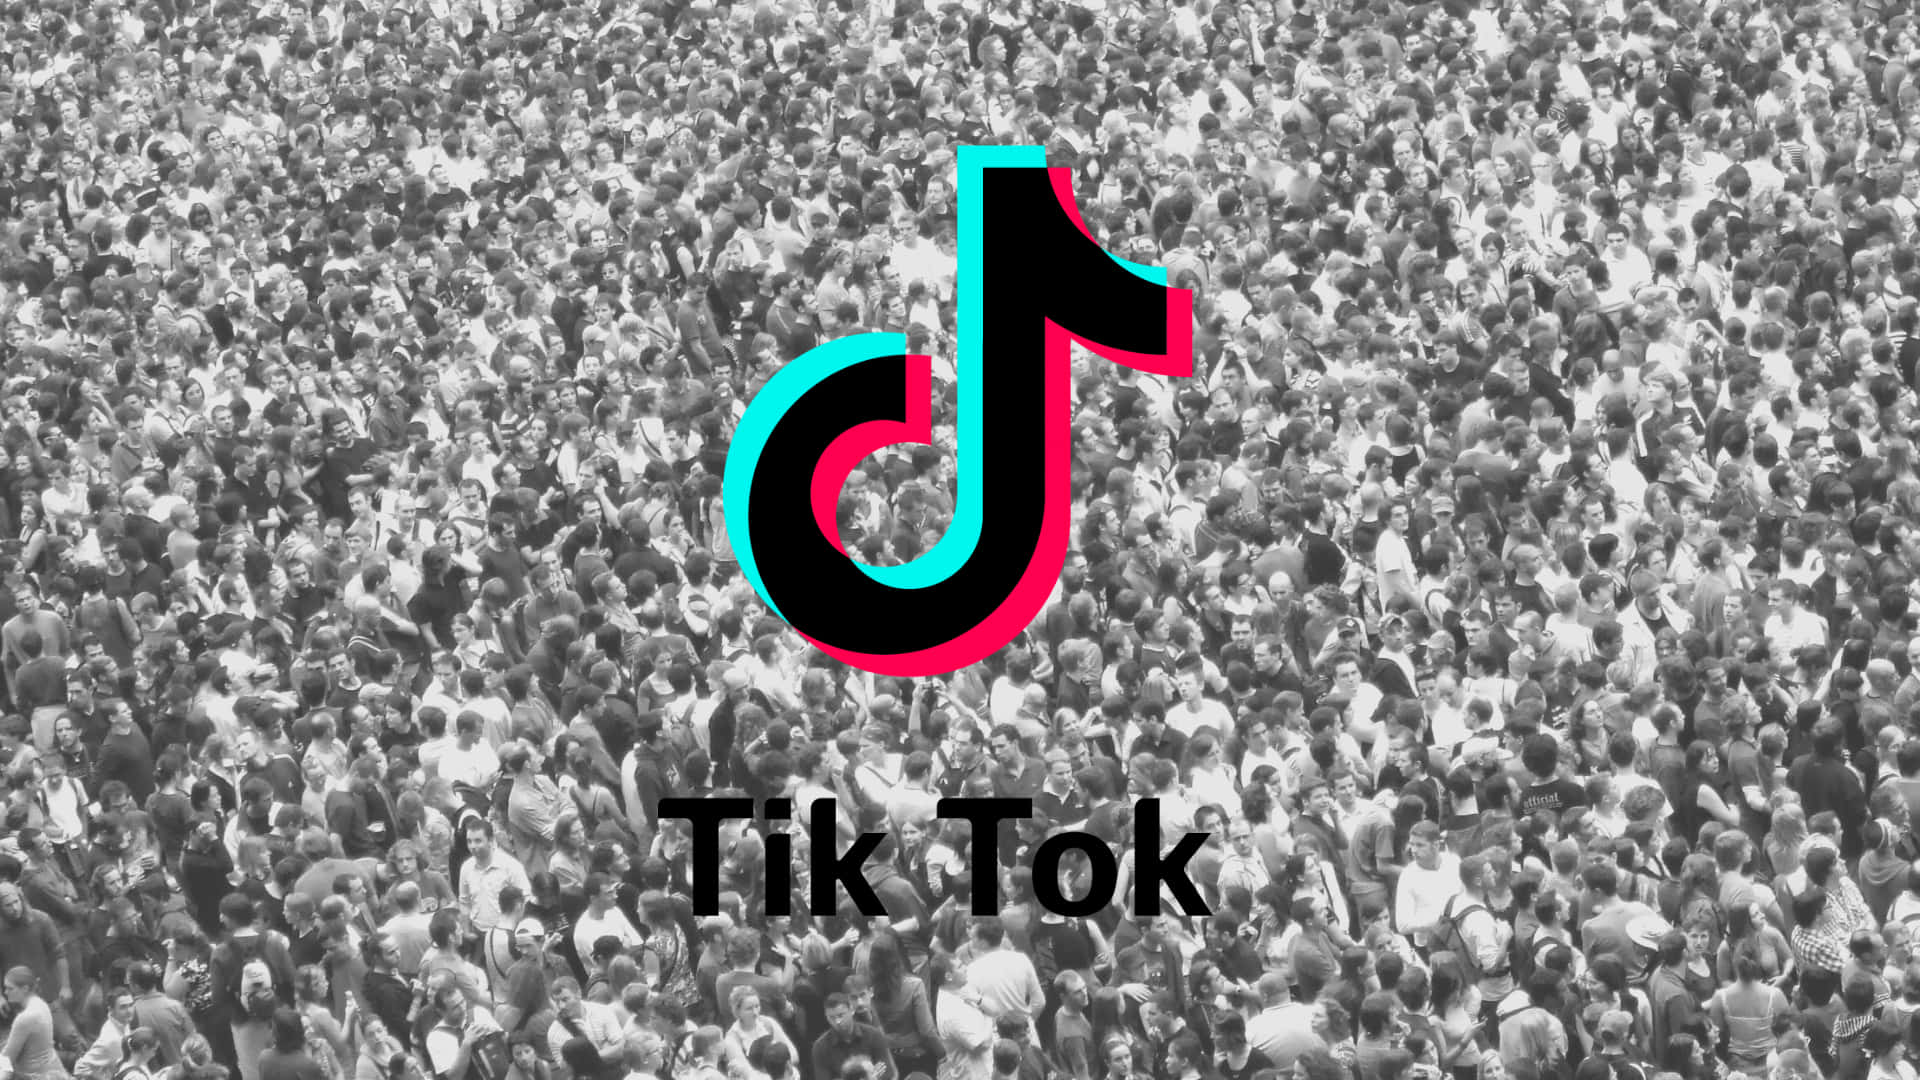 tik tok logo with a crowd of people